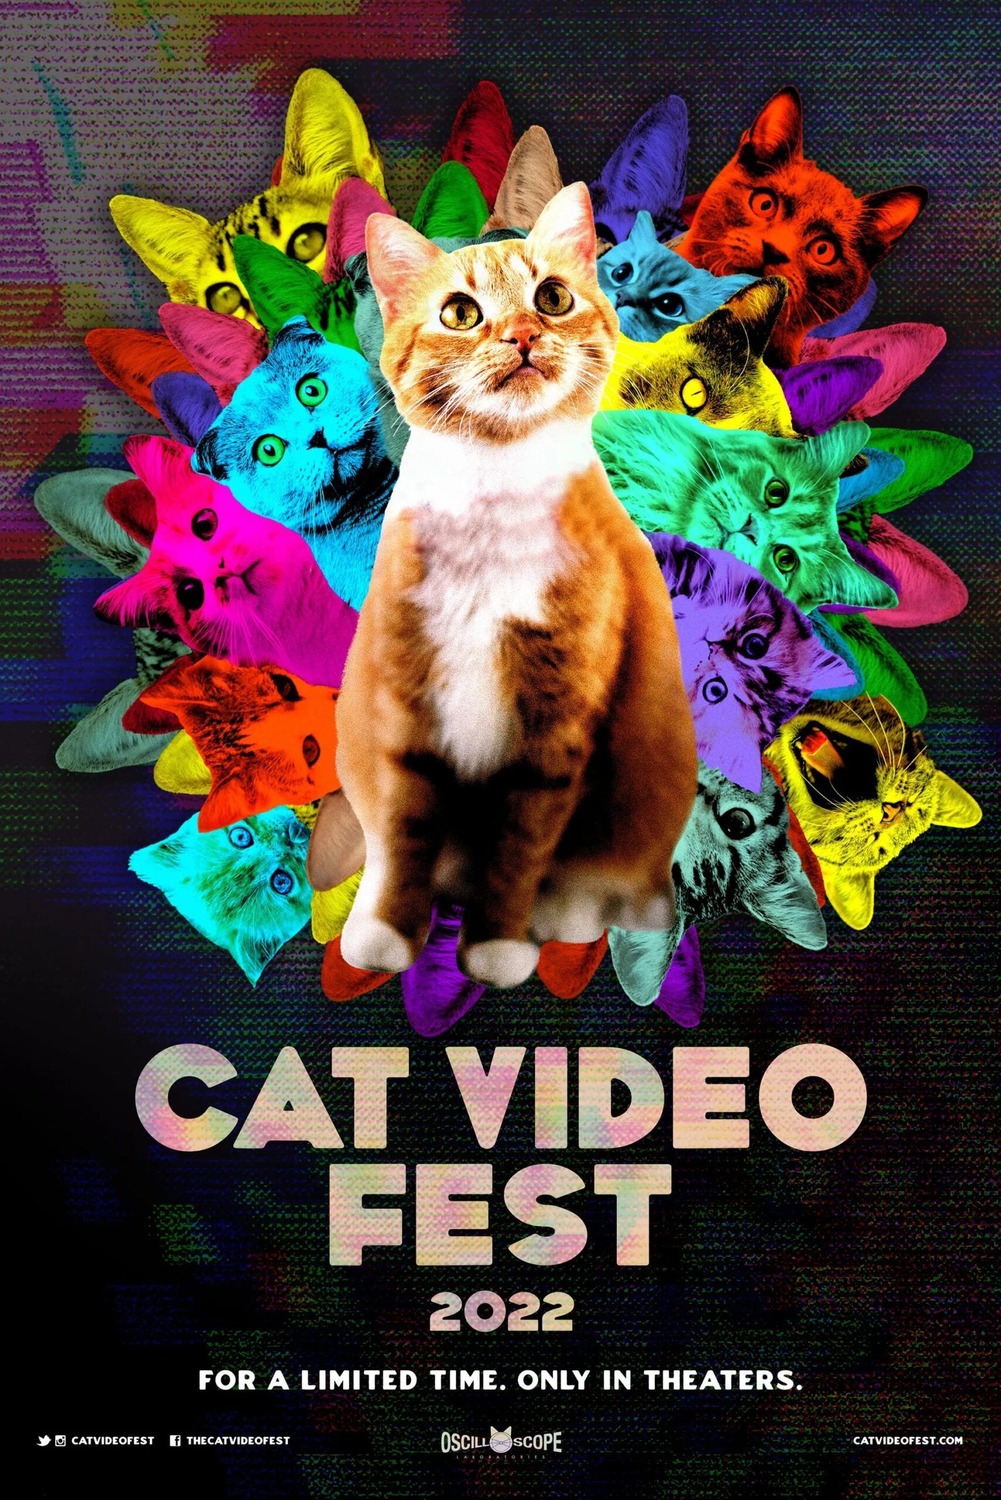 Extra Large Movie Poster Image for CatVideoFest 2022 